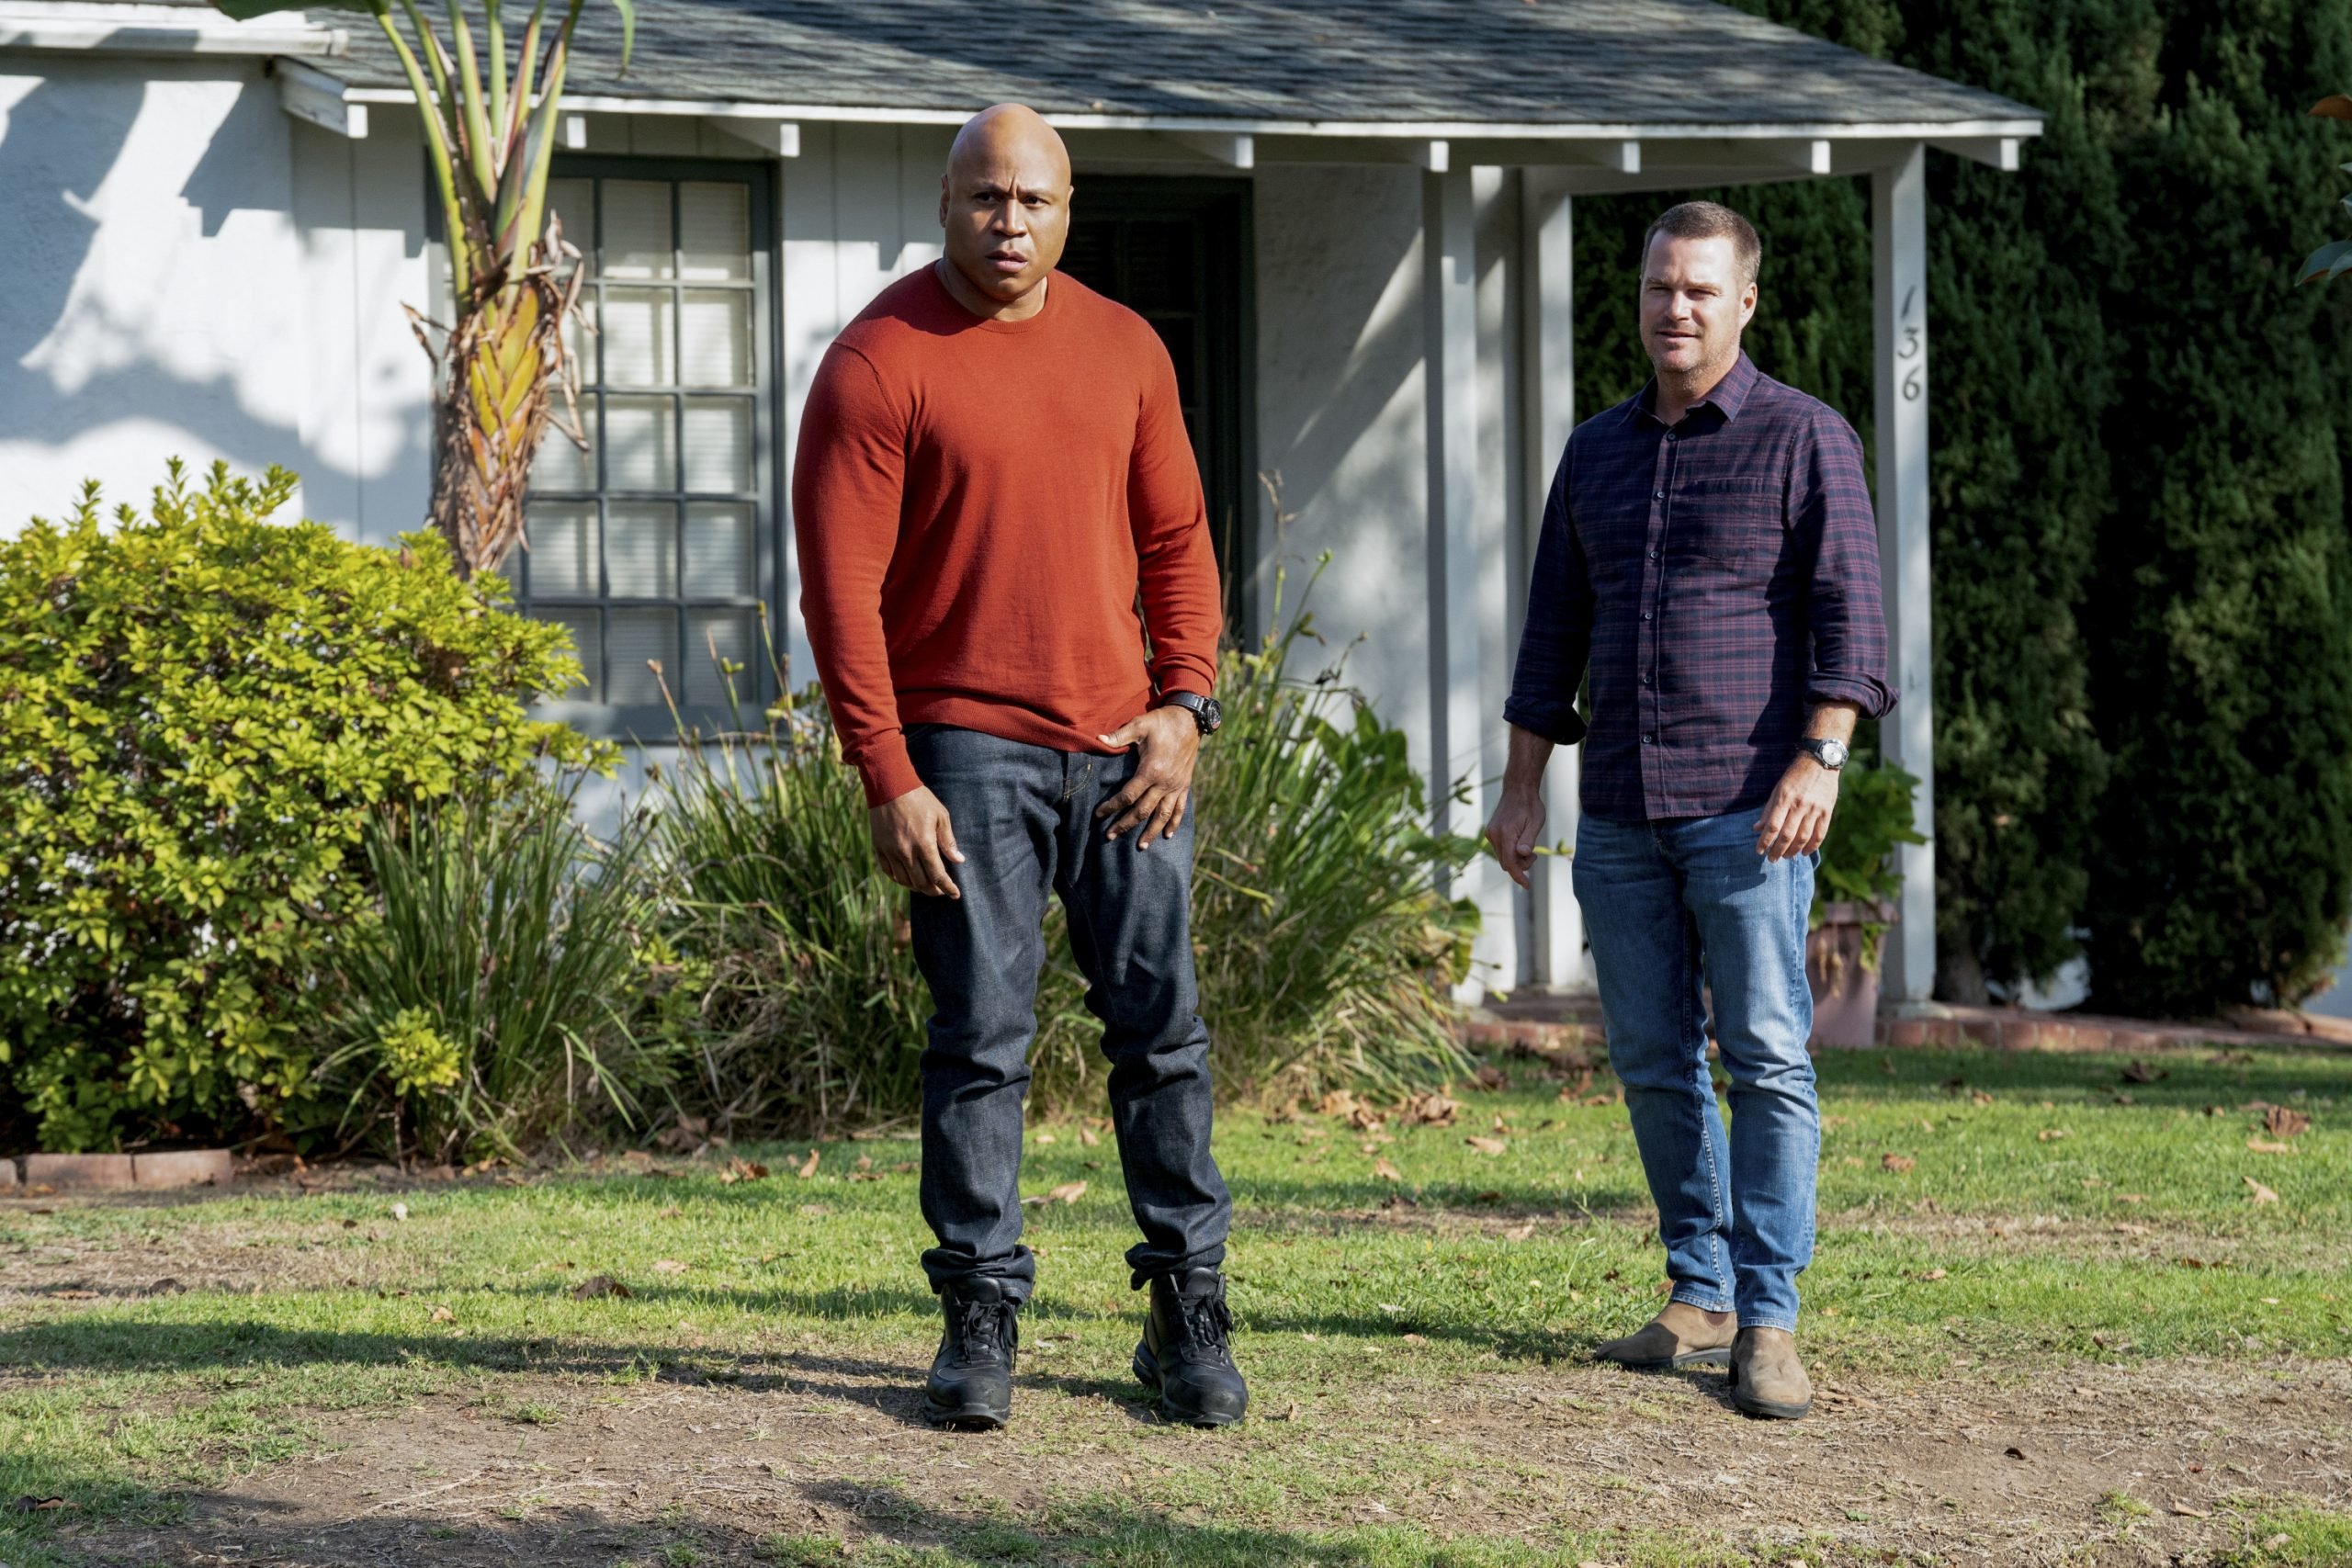 LL Cool J and Chris O'Donnell play Special Agents Sam Hanna and G. Callen on NCIS Los Angeles